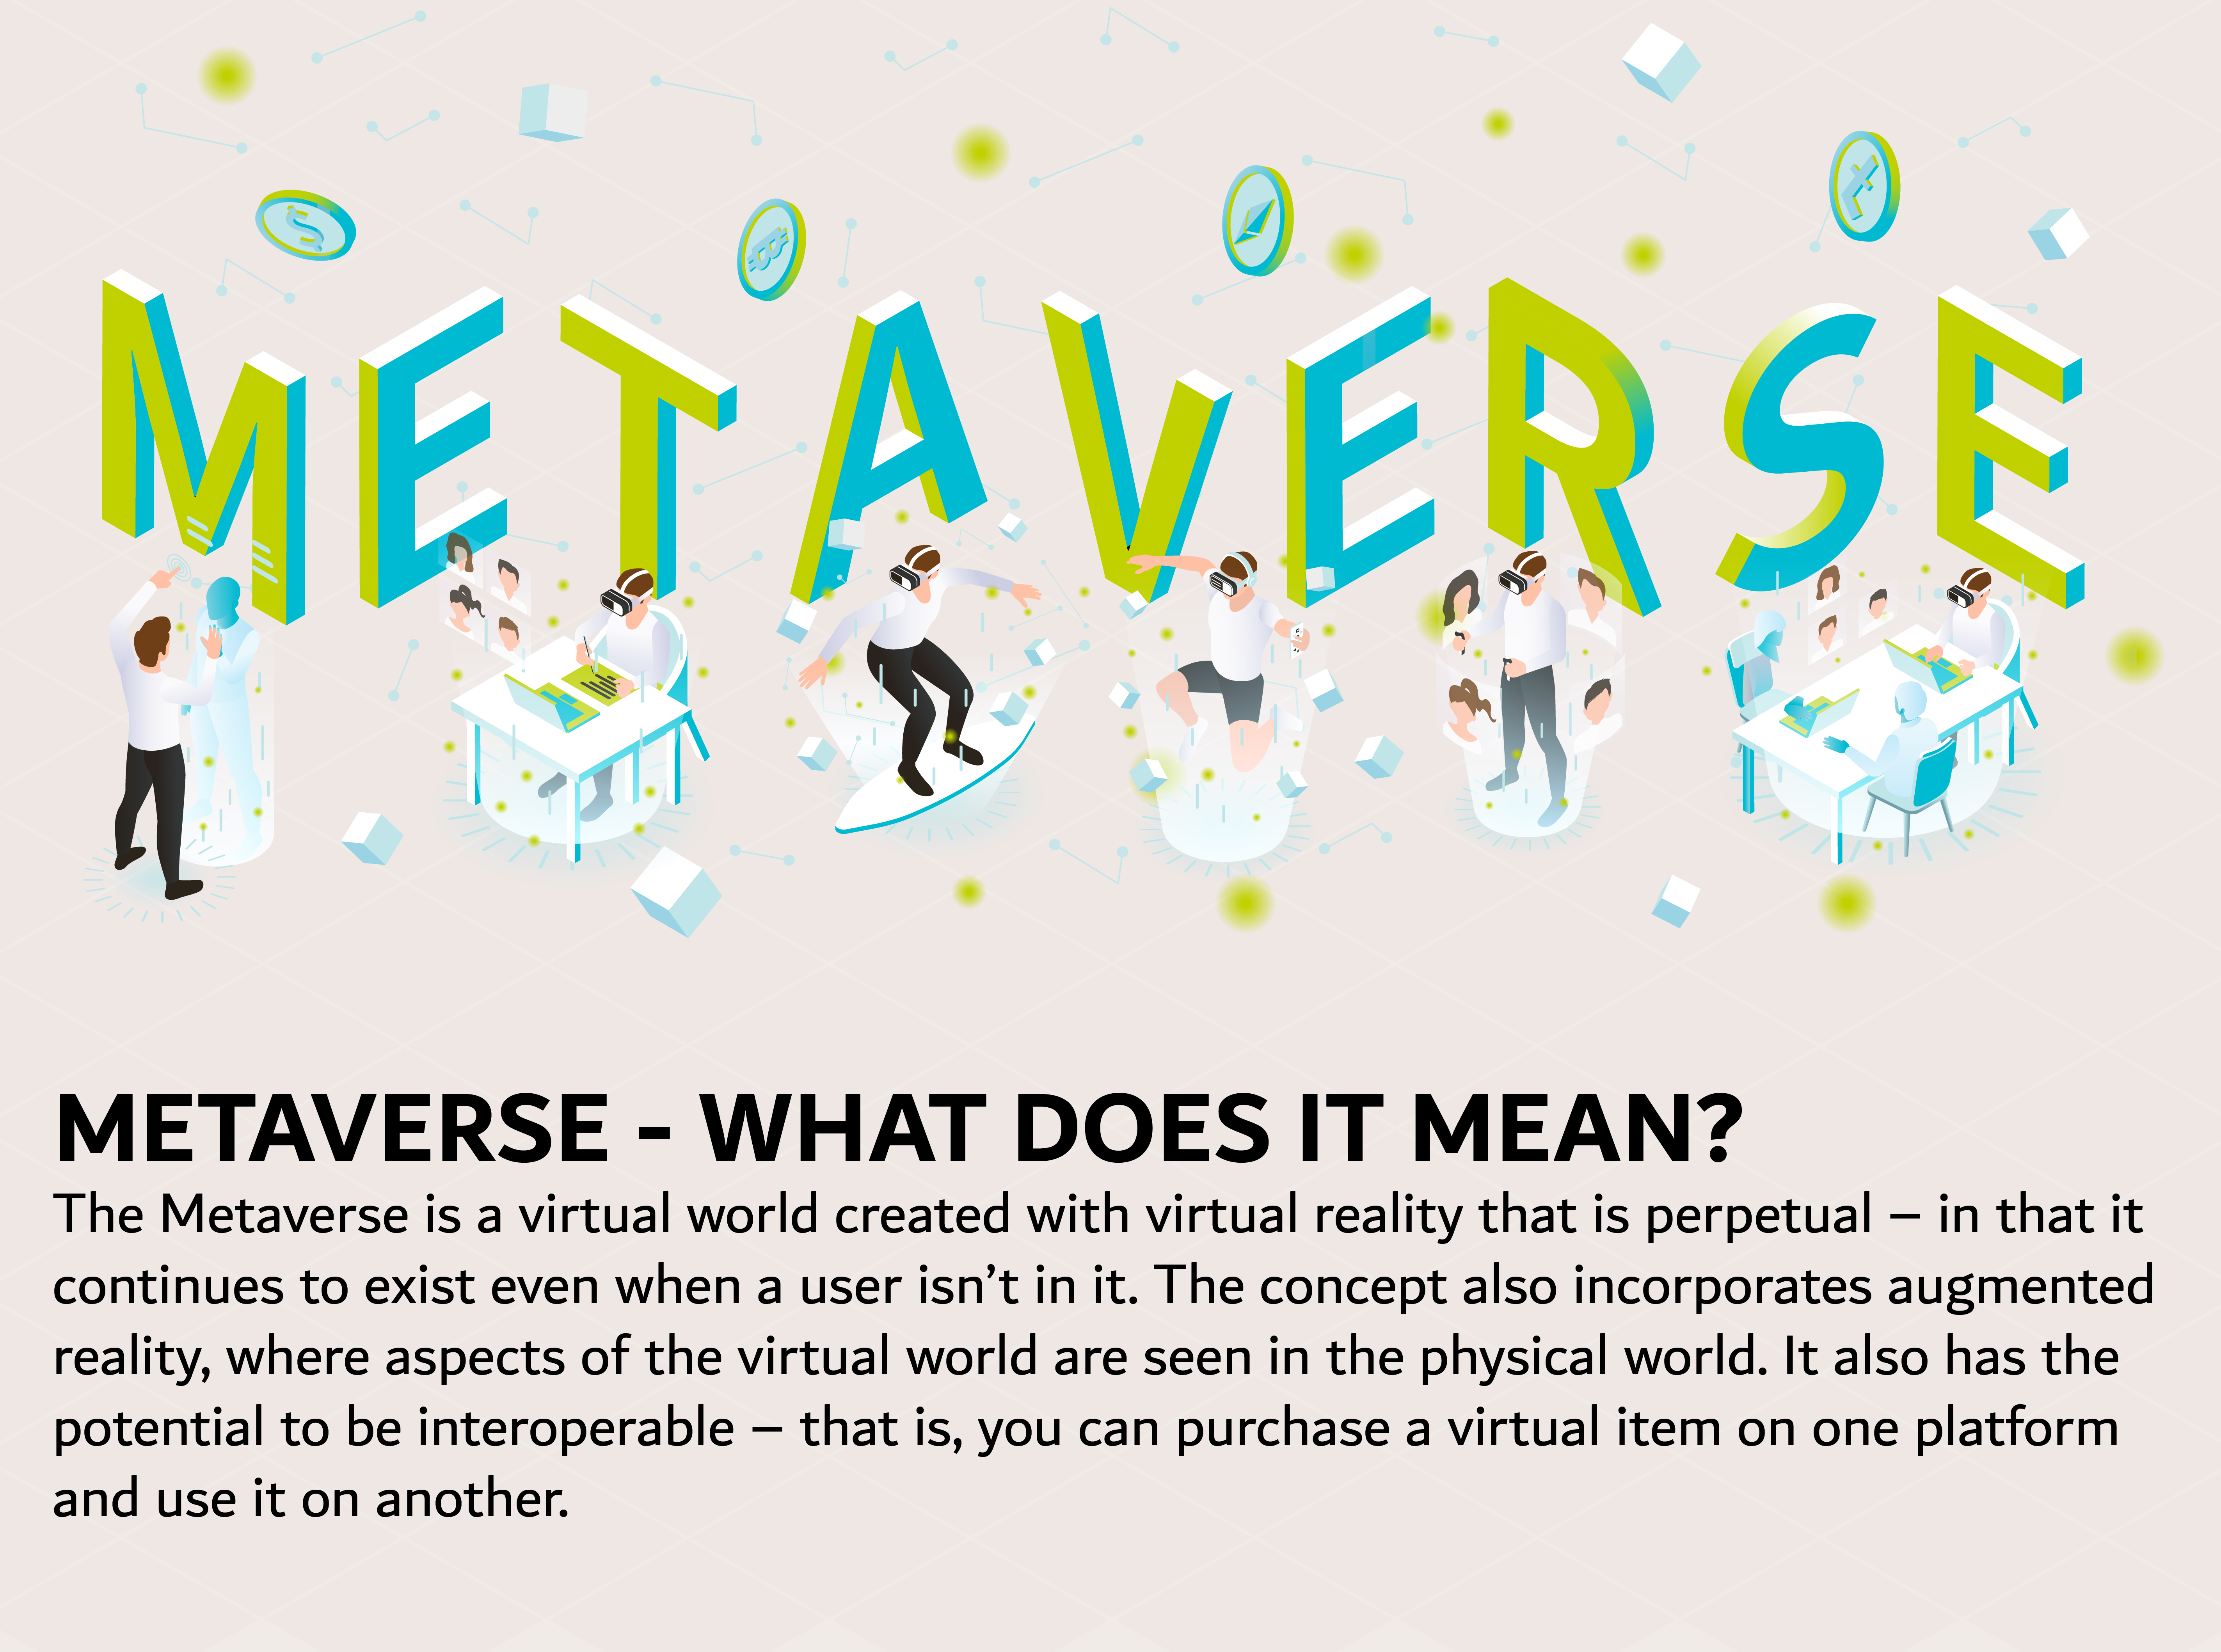 Metaverse-what does it mean